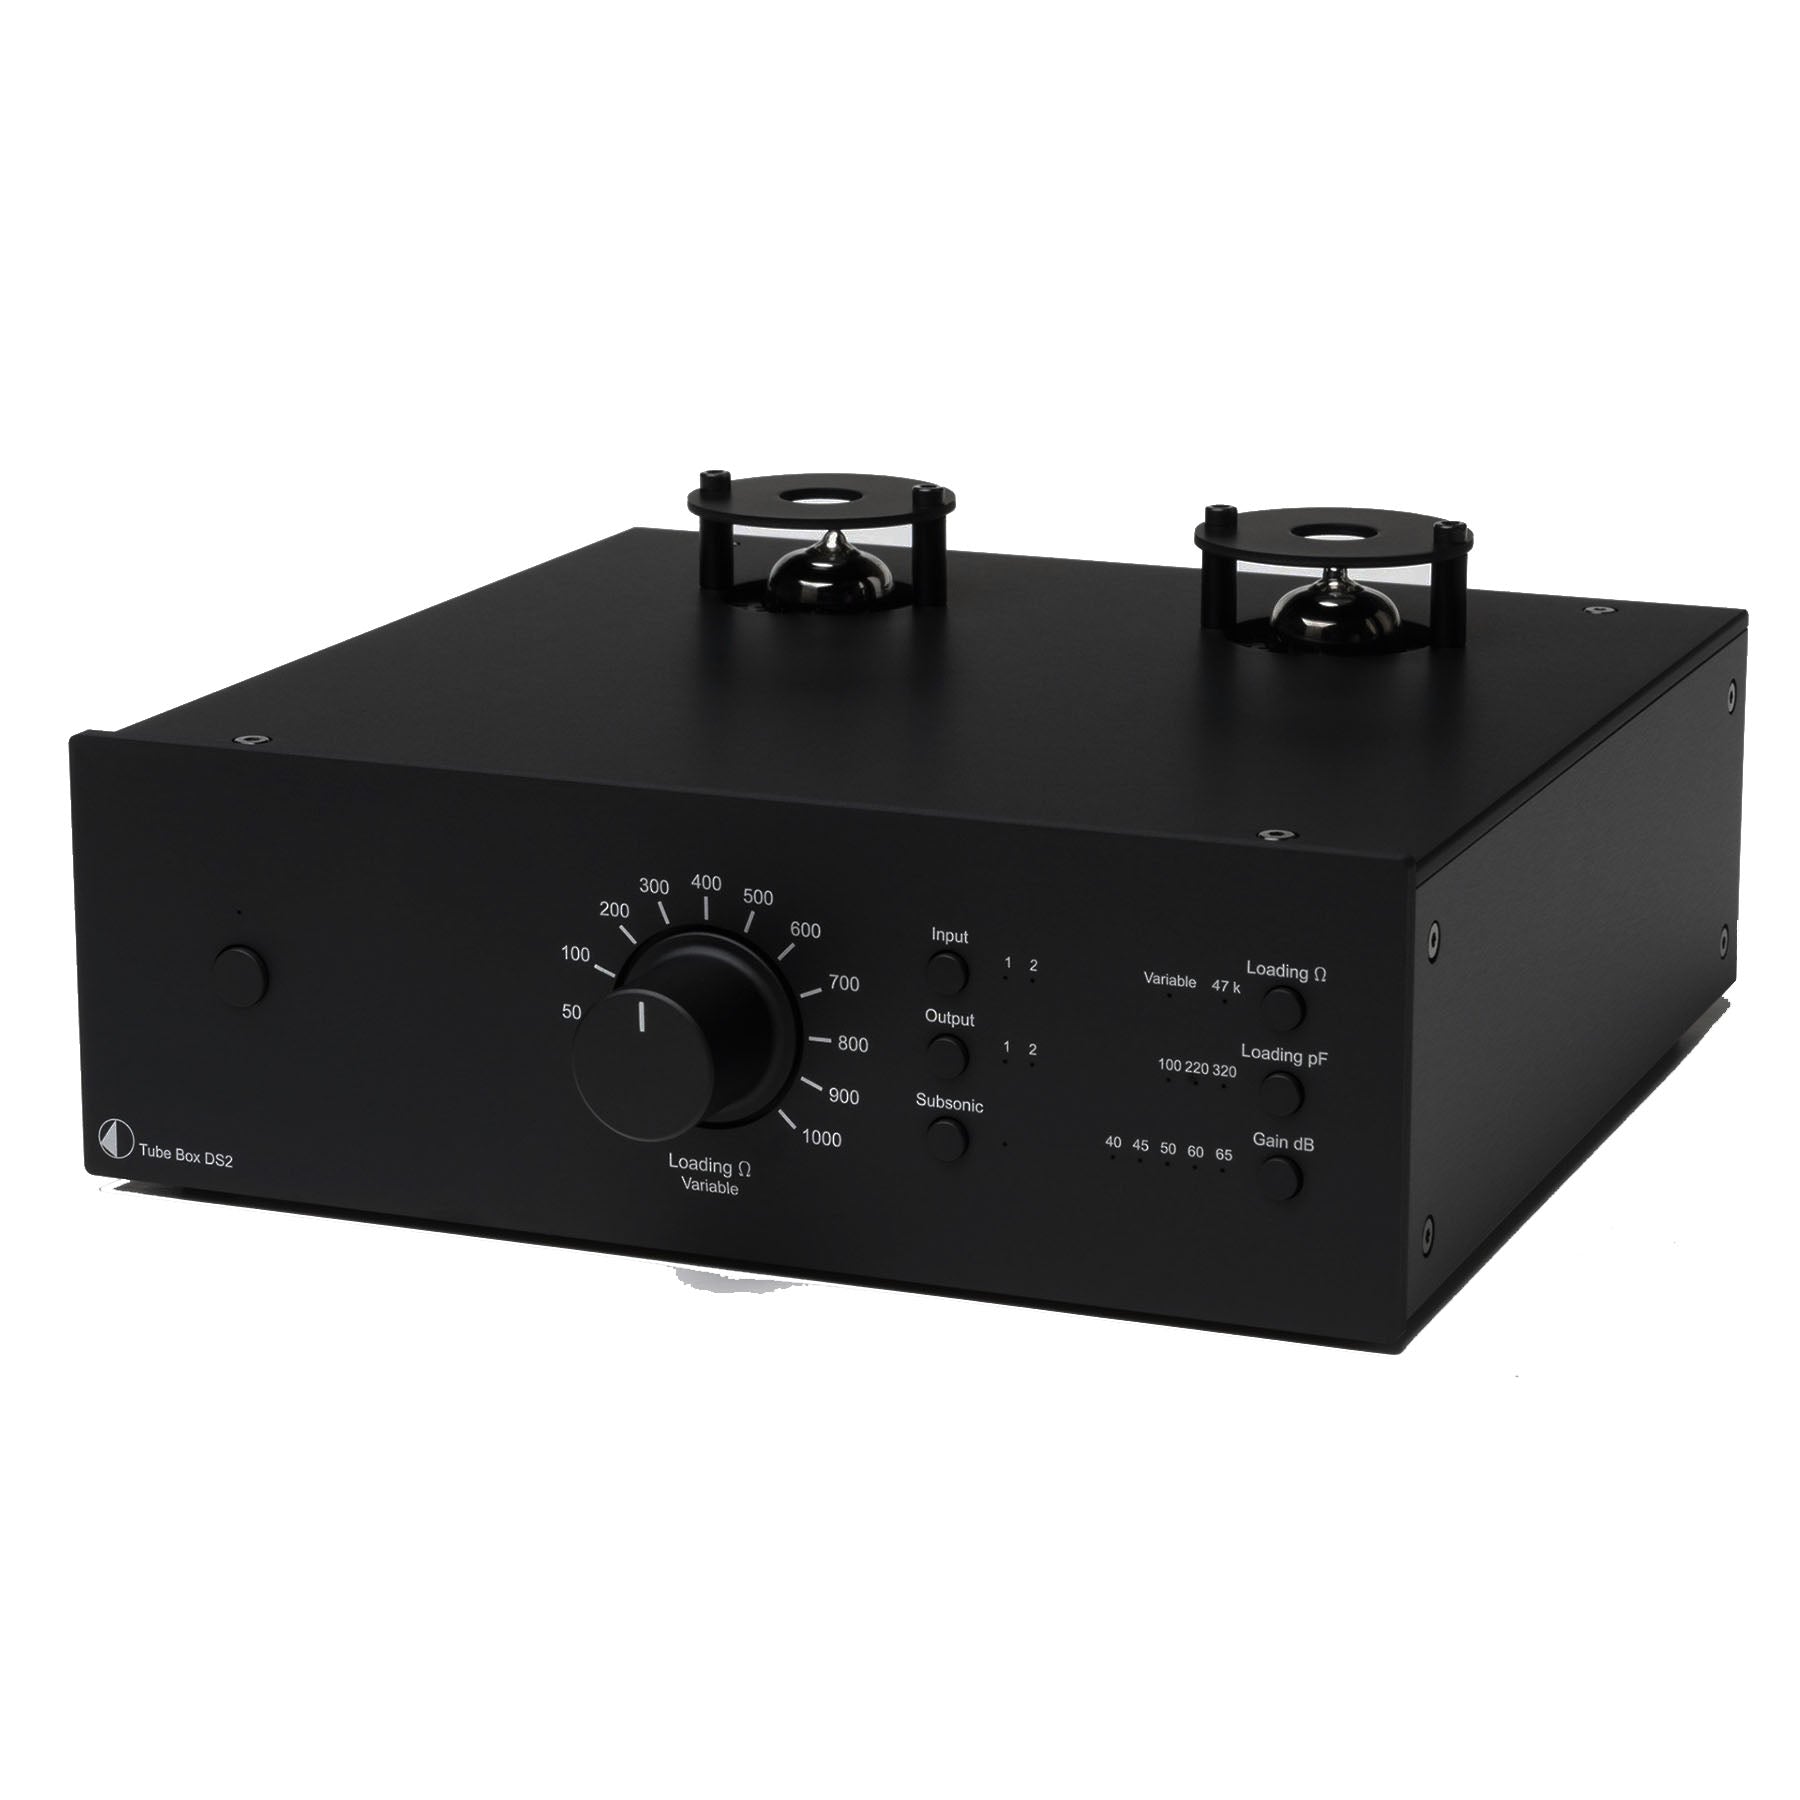 Pro-Ject Tube Box DS2 Phono Pre-amplifier